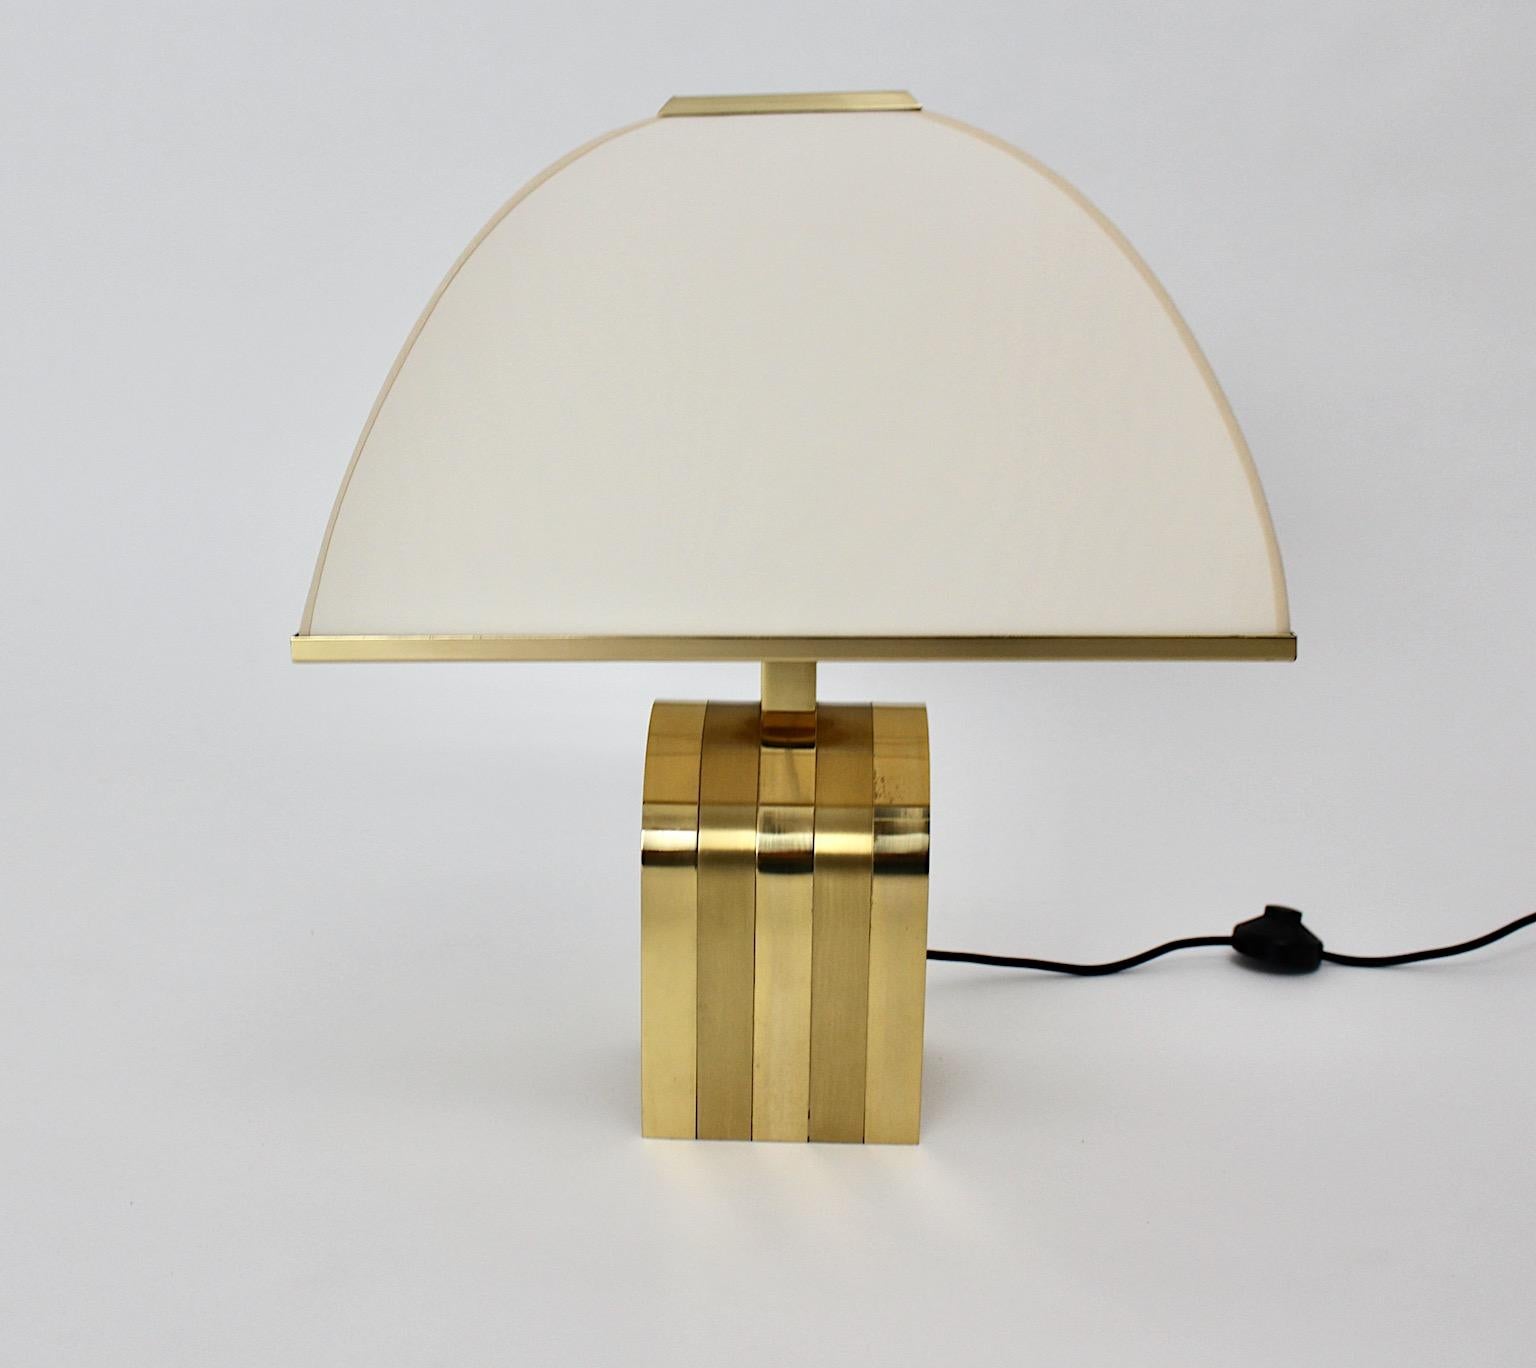 Hollywood Regency style vintage table lamp from brass and textile fabric shade by Romeo Rega Italy 1970s.
While the U like base from brass shows beautiful patina, the handmade lamp shade from textile fabric with brass trim in butter cream color